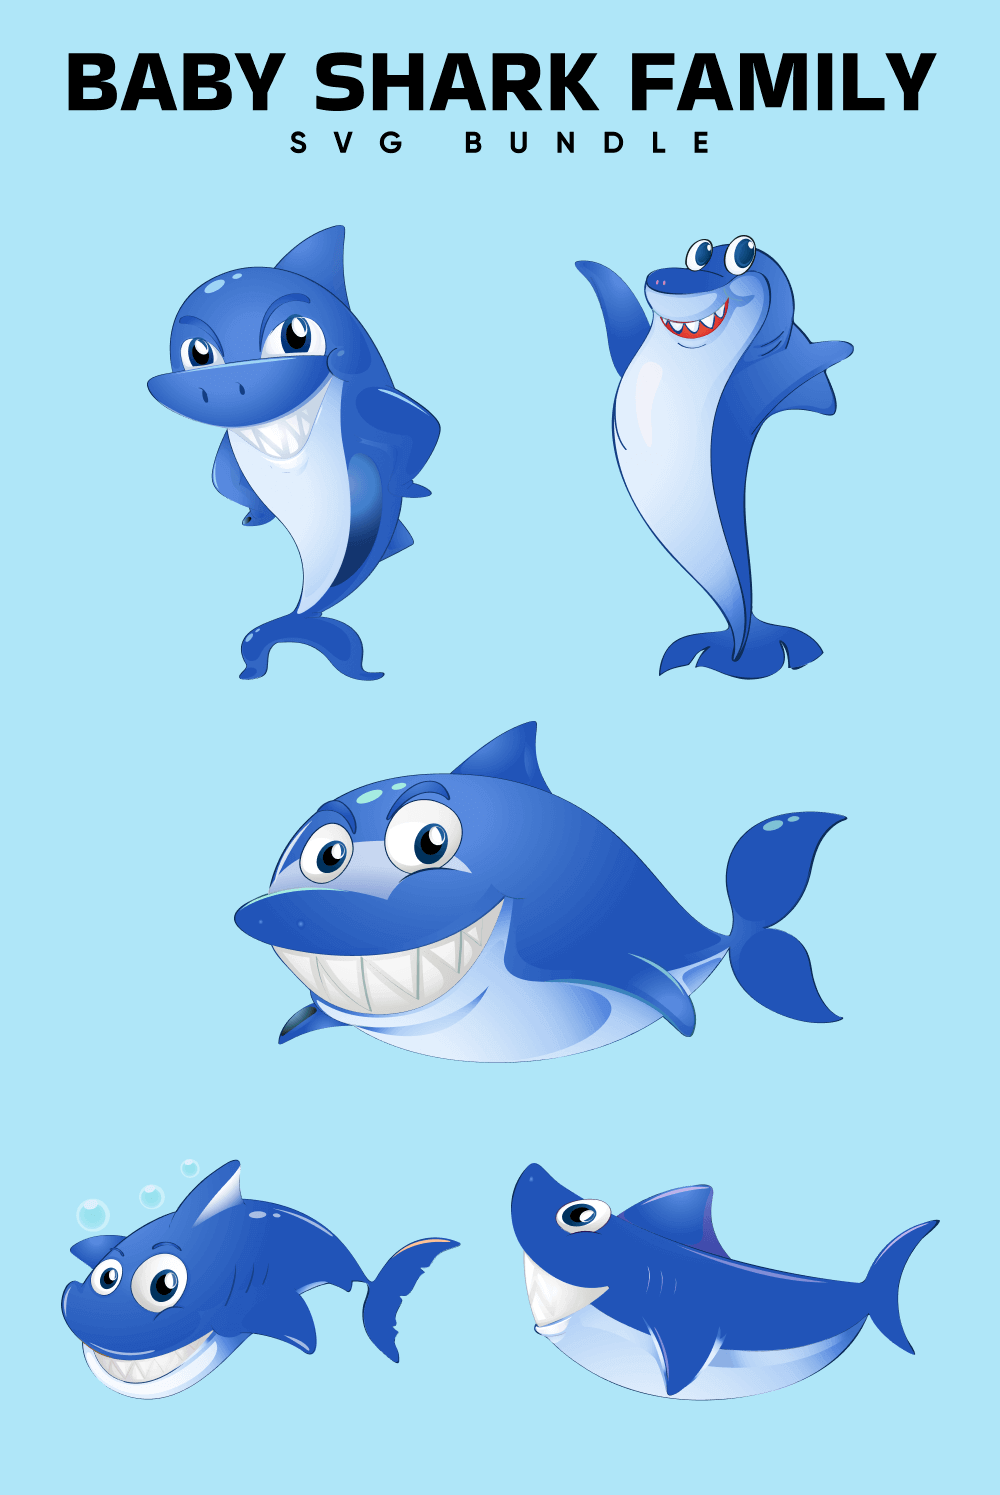 Collage of sharks in blue color with big smiles.